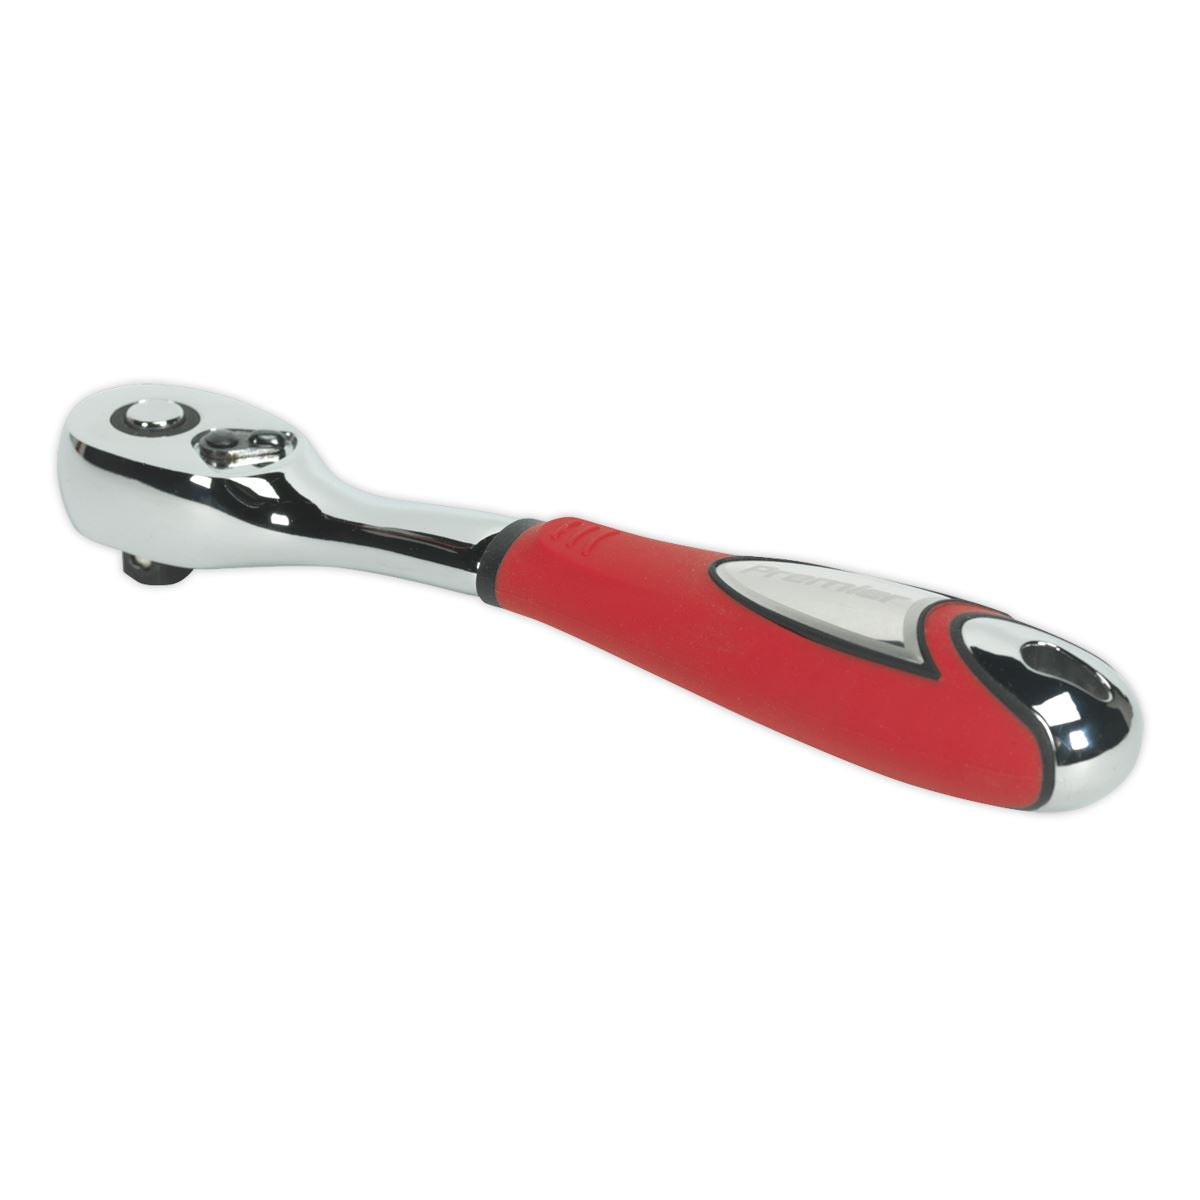 Sealey Premier Ratchet Wrench Offset 3/8"Sq Drive